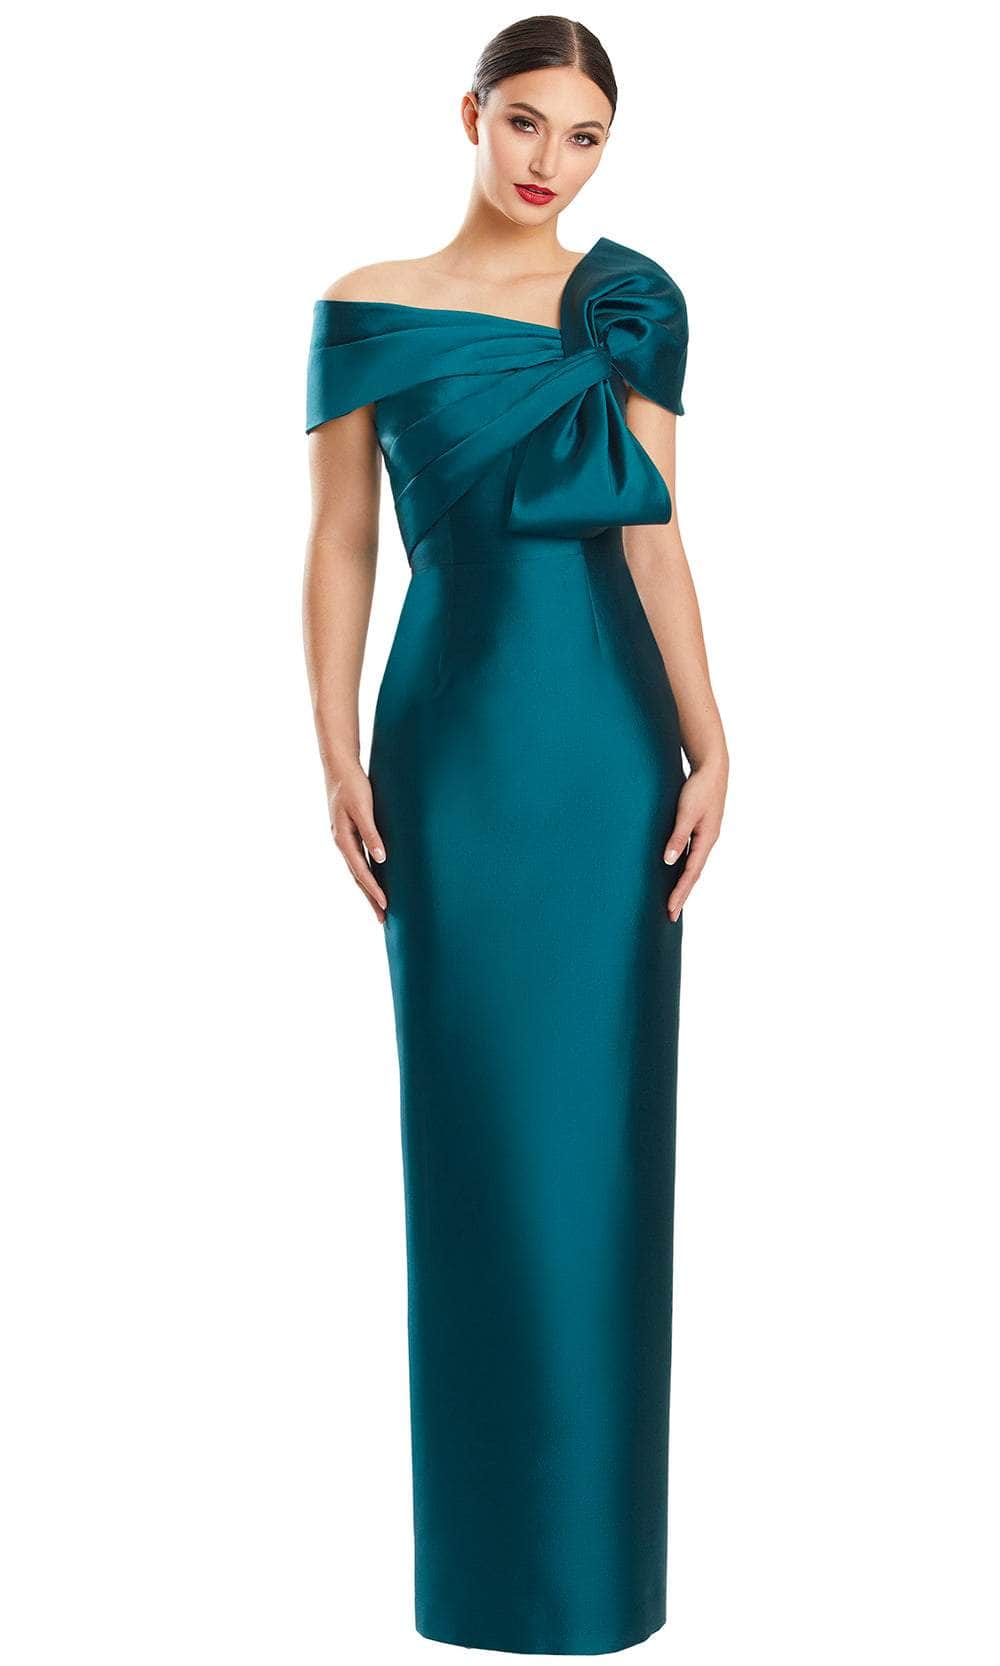 Alexander by Daymor 1885F23 - Bow Accented Evening Dress